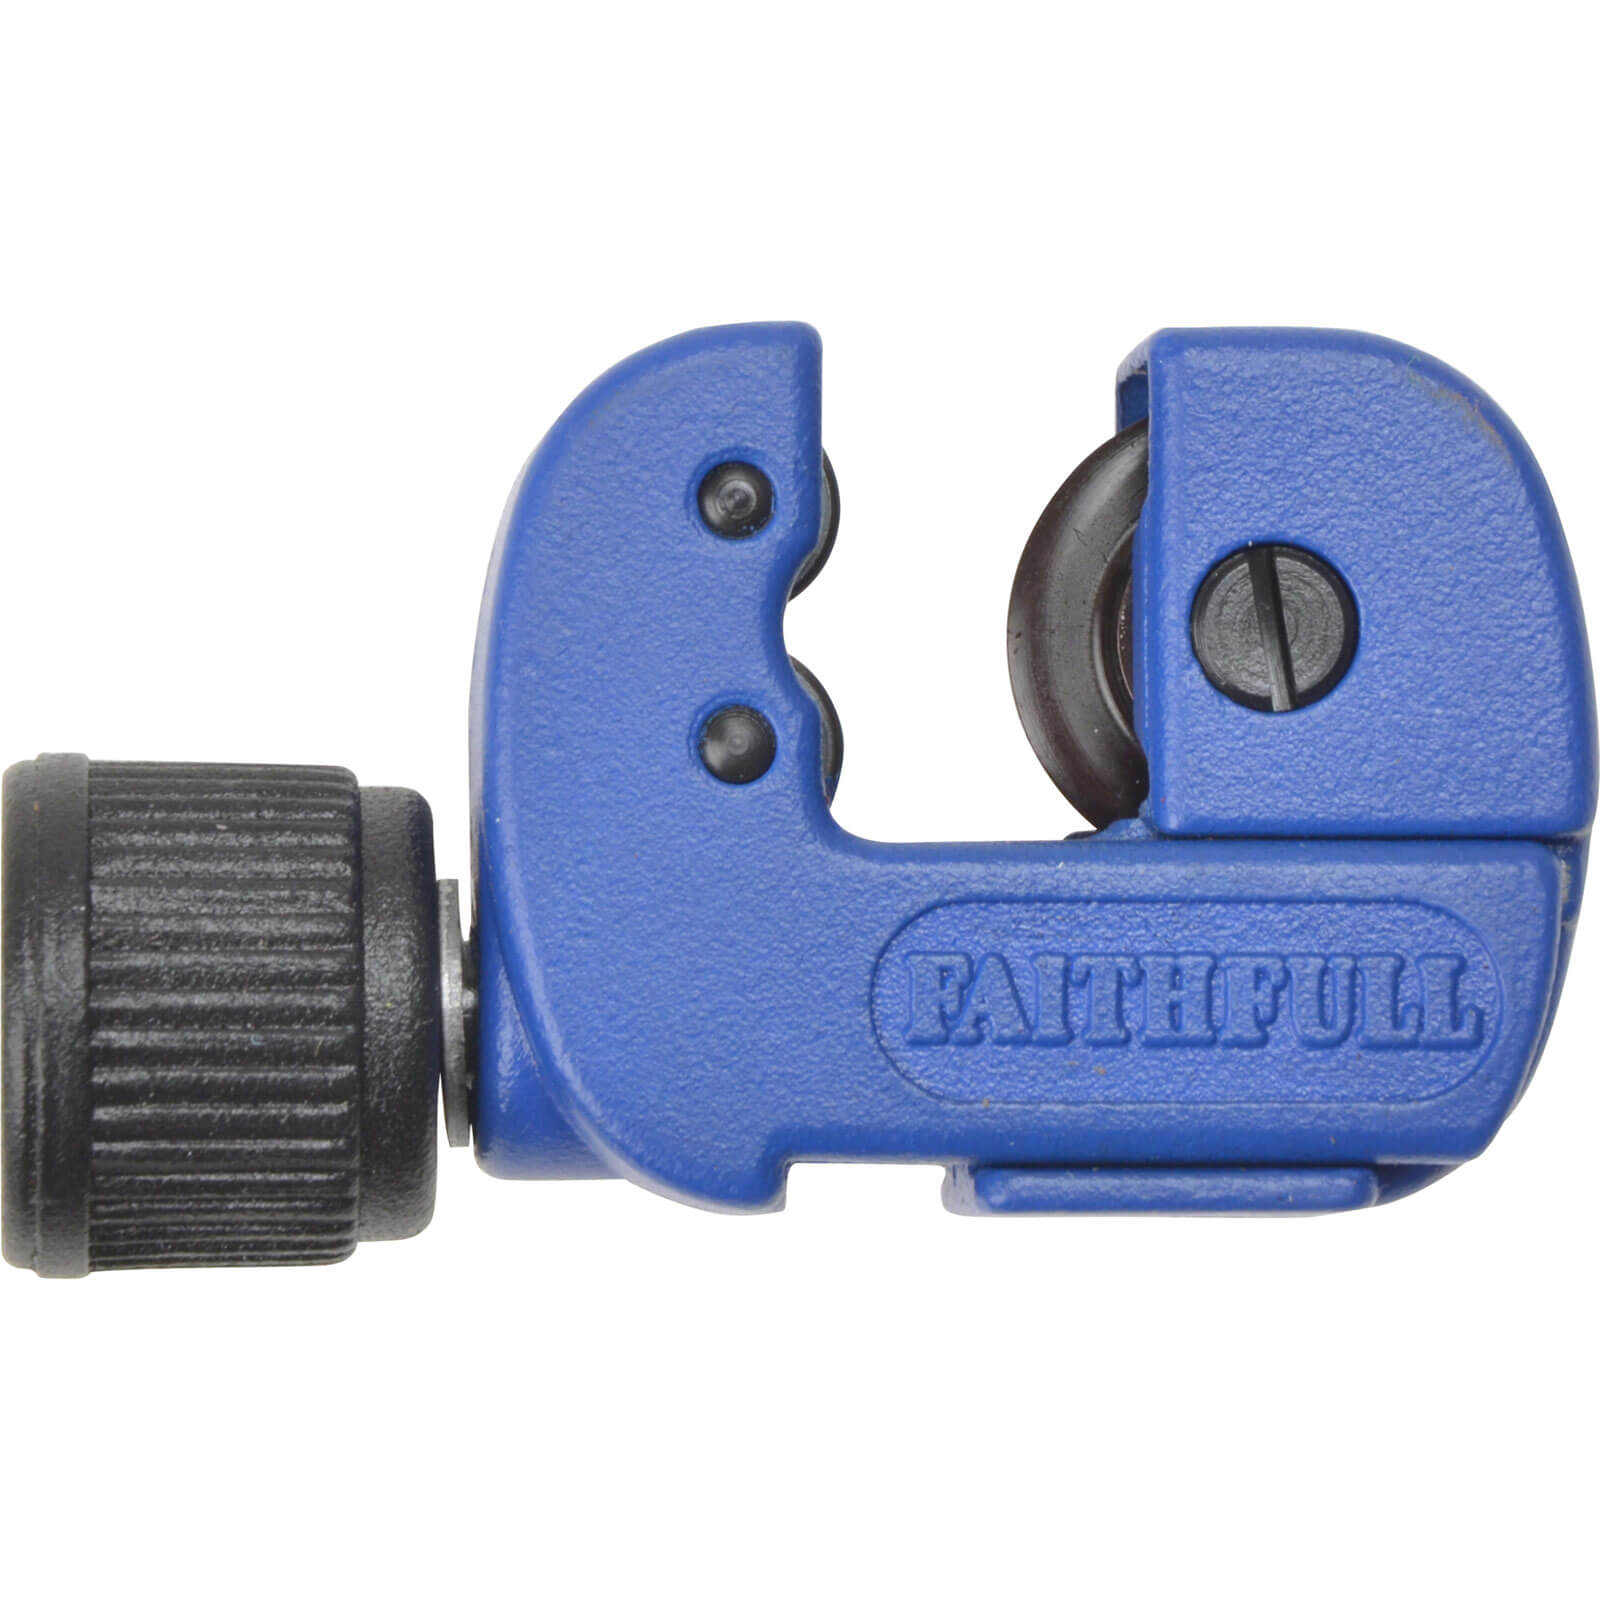 Photo of Faithfull Adjustable Pipe Cutter 3mm - 16mm